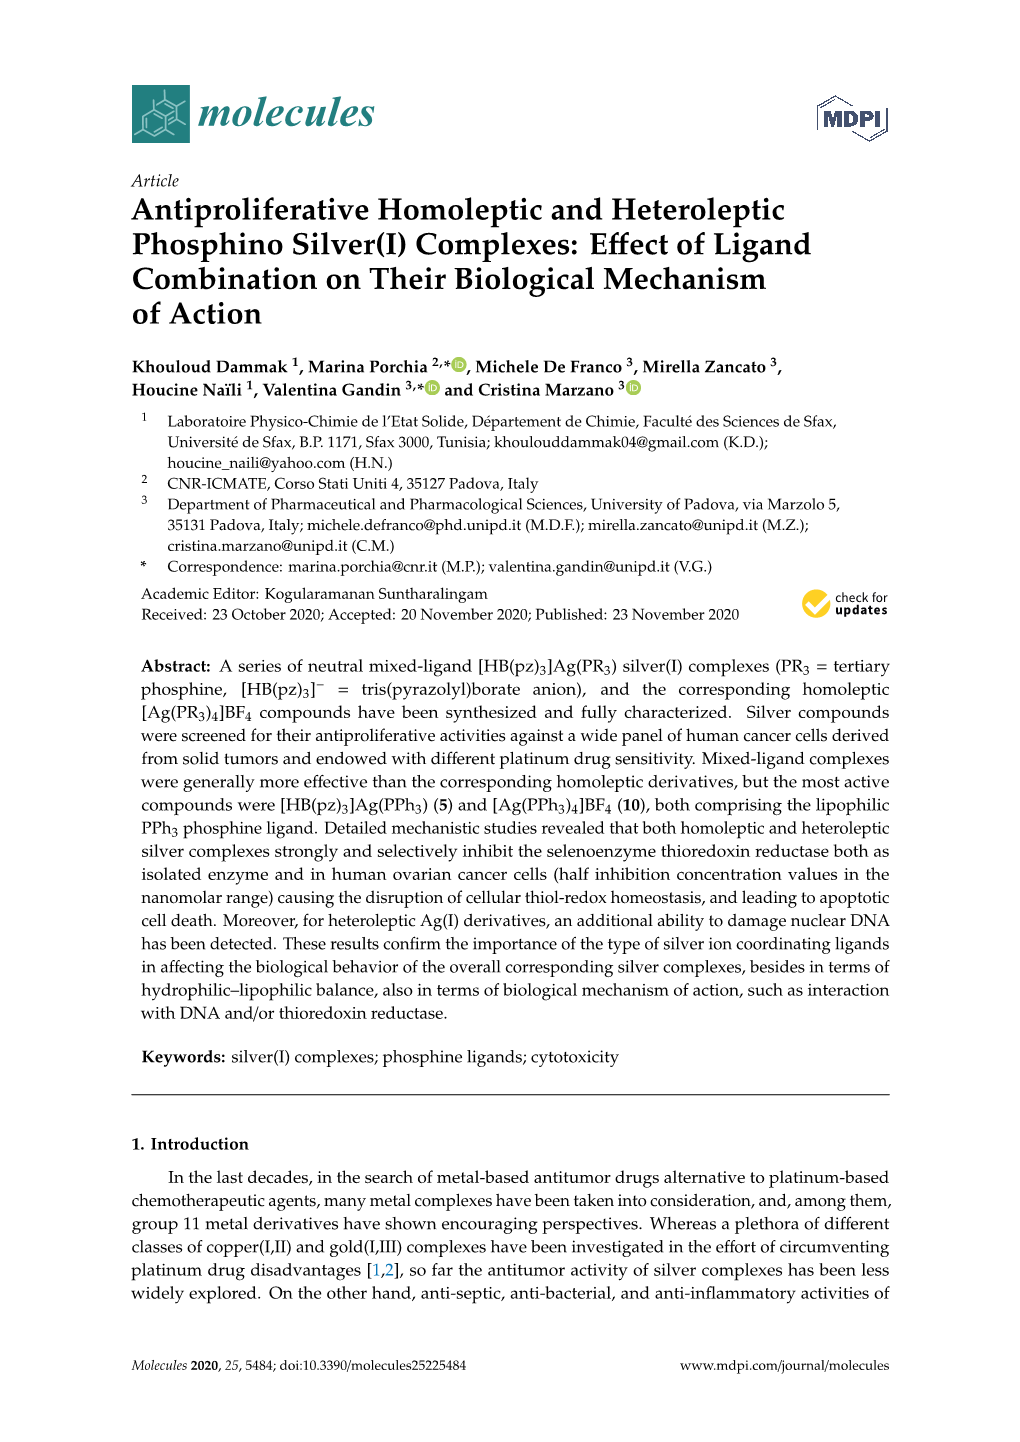 Antiproliferative Homoleptic and Heteroleptic Phosphino Silver(I) Complexes: Eﬀect of Ligand Combination on Their Biological Mechanism of Action